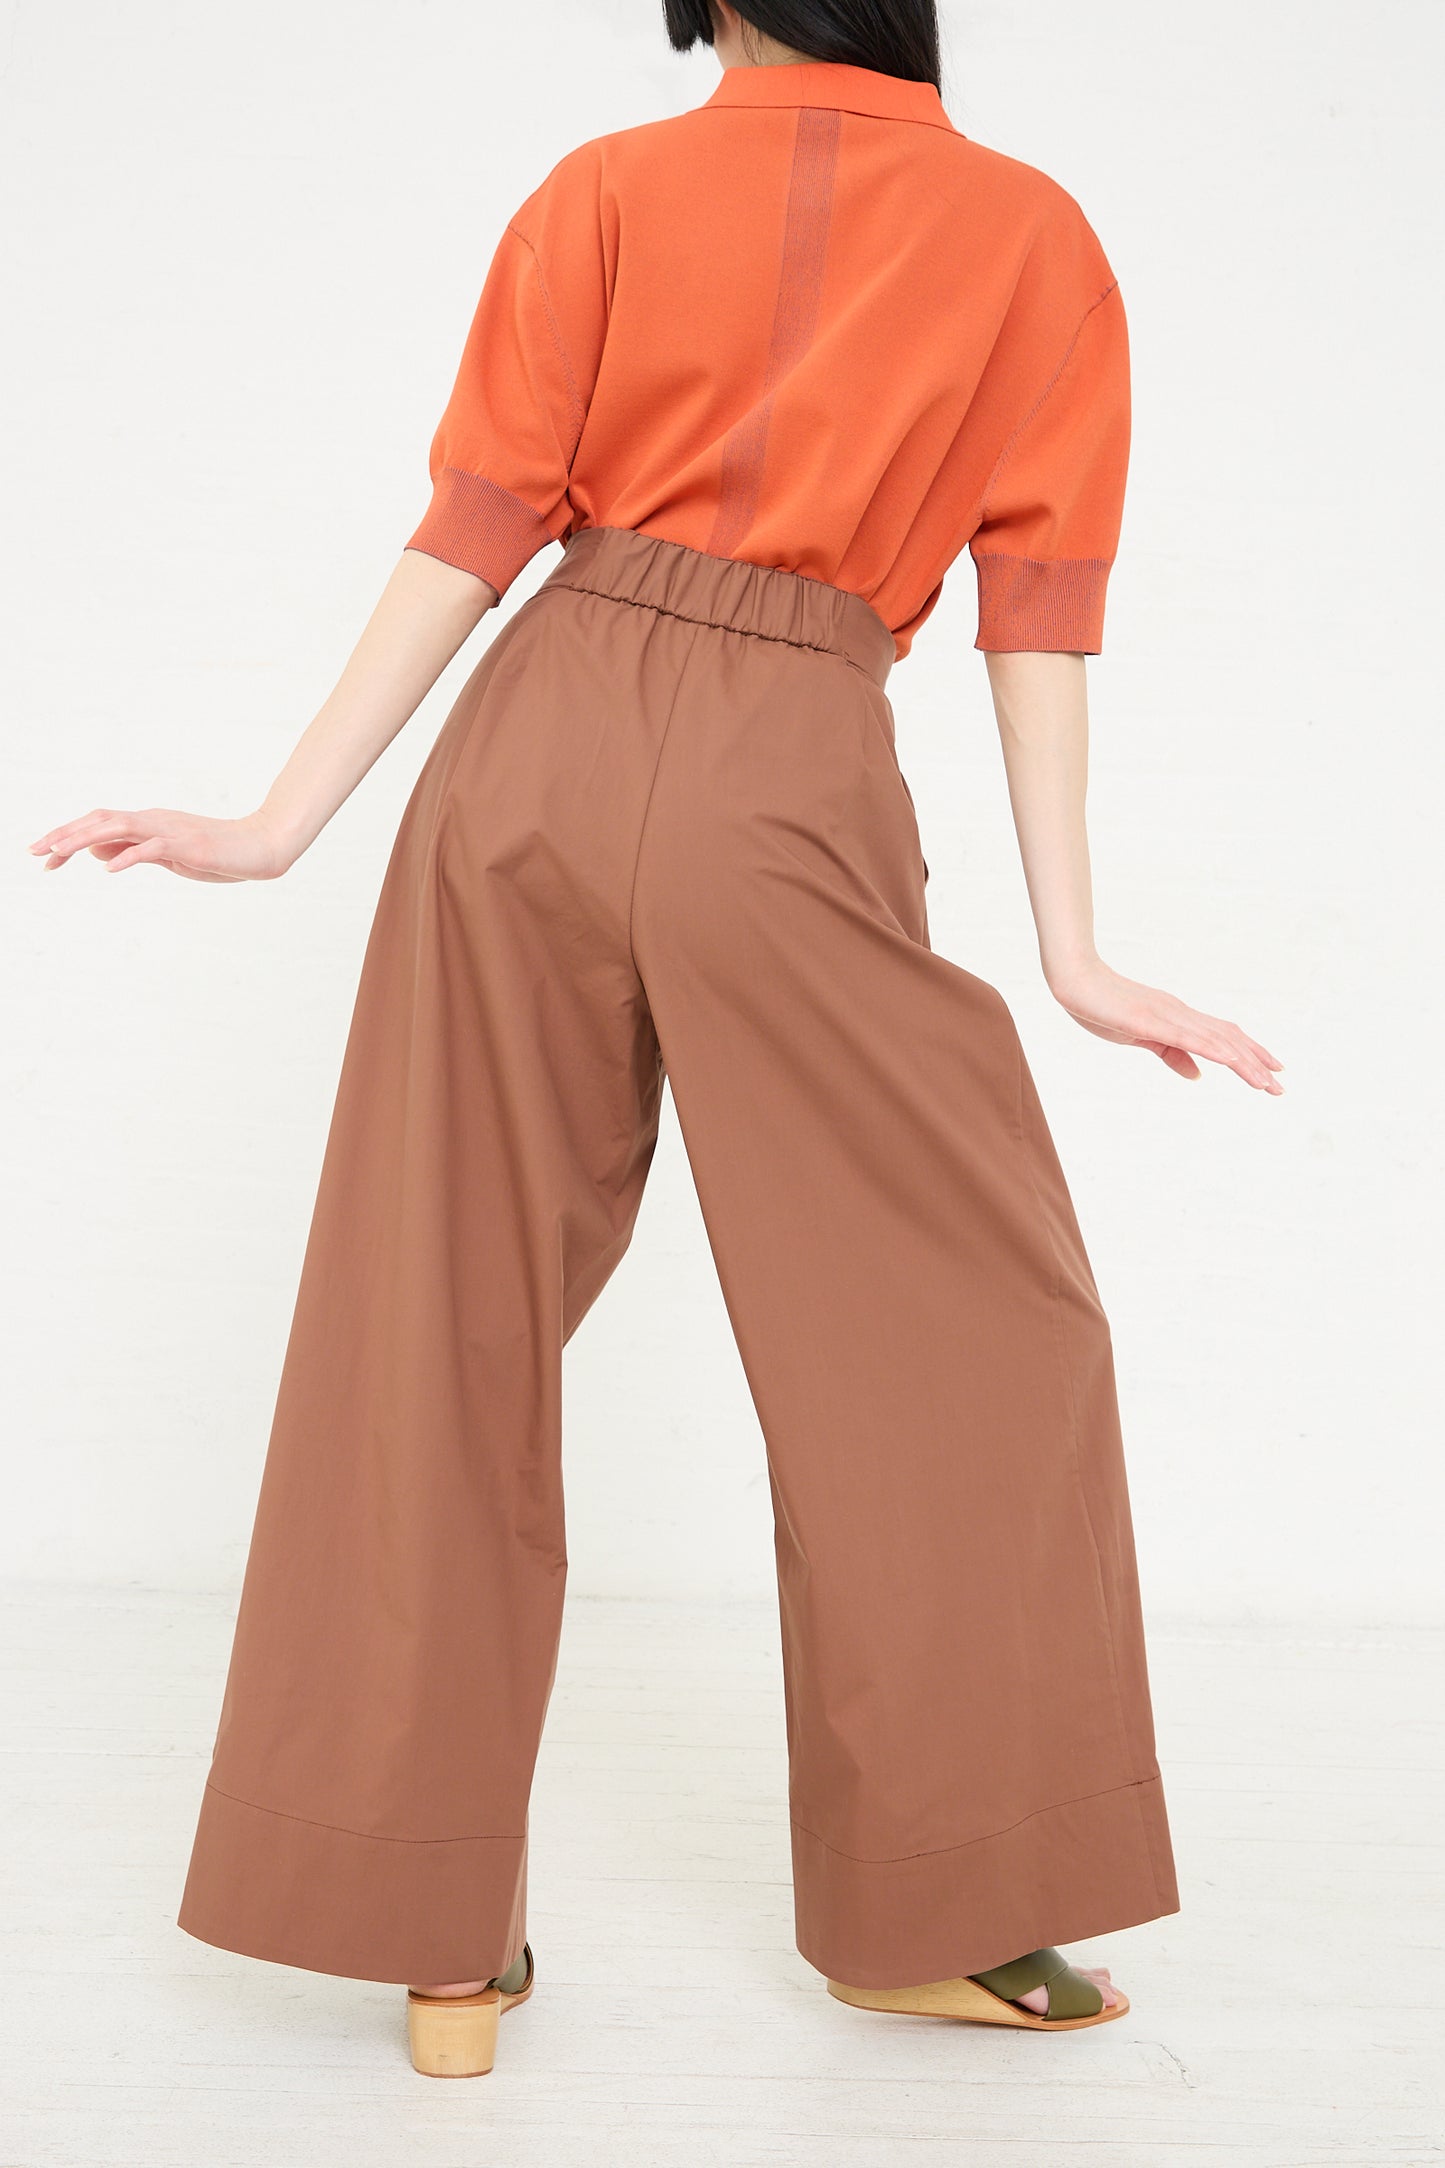 A woman is shown from the back wearing Rachel Comey's Coxsone Pant in Sienna, a pair of brown wide-leg, high waisted trousers and an orange top, posed with her hands lifted slightly away from her body.